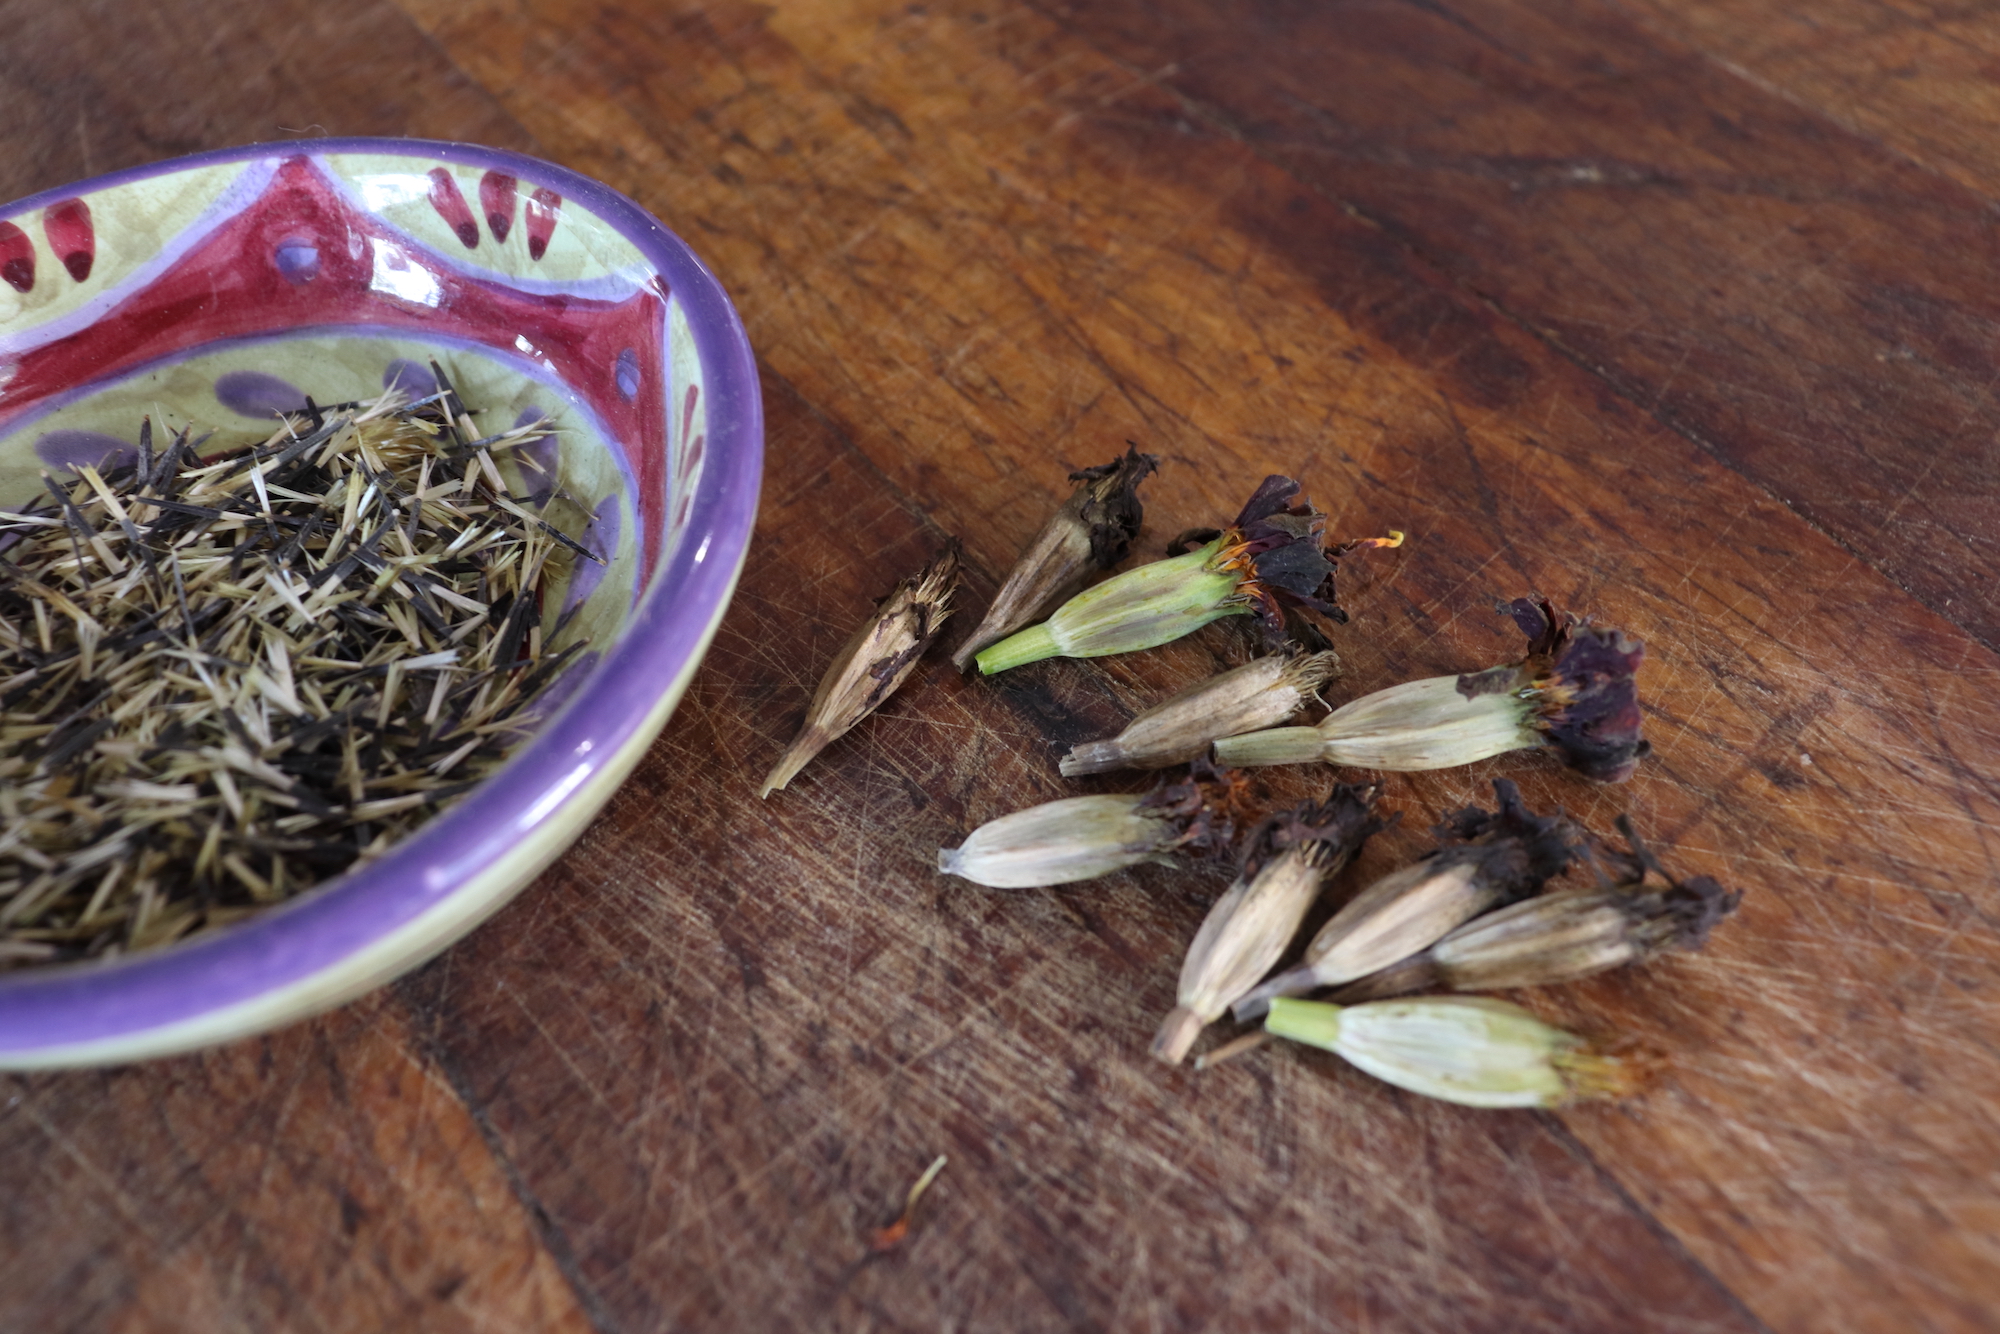 Dish of marigold seeds and some seed pods